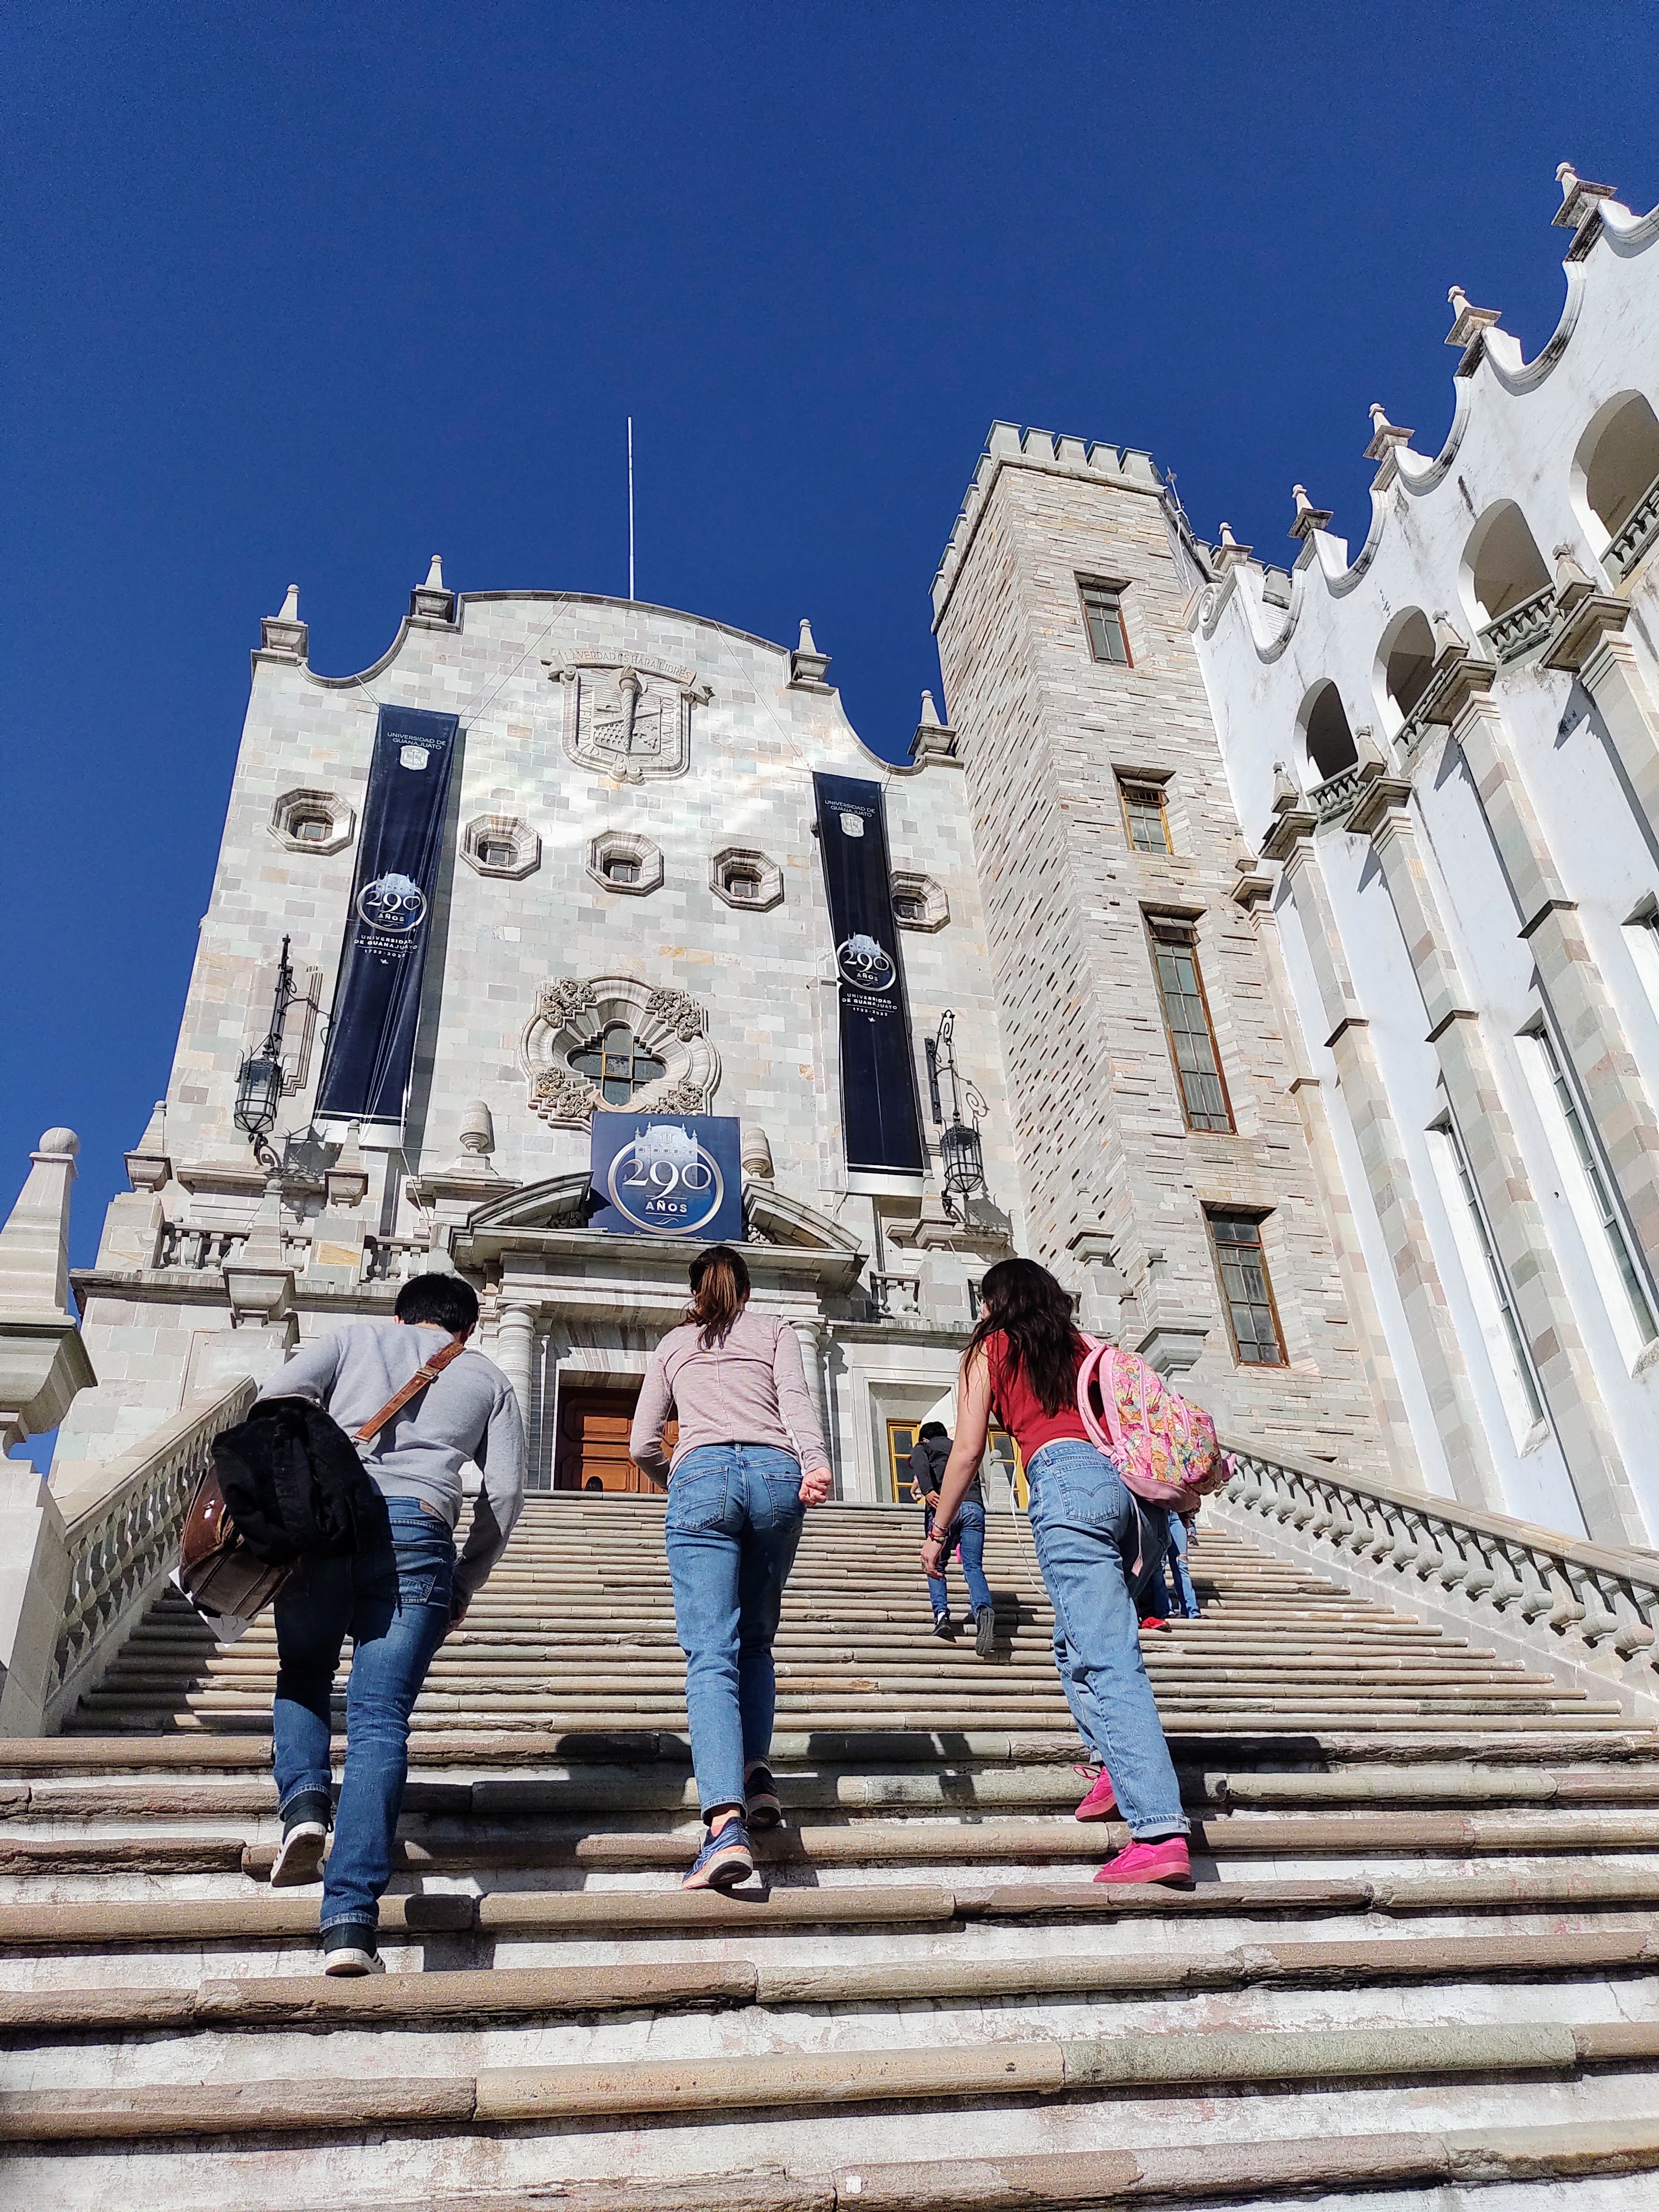 Participants during a walk through the city of Guanajuato, looking for new perspectives